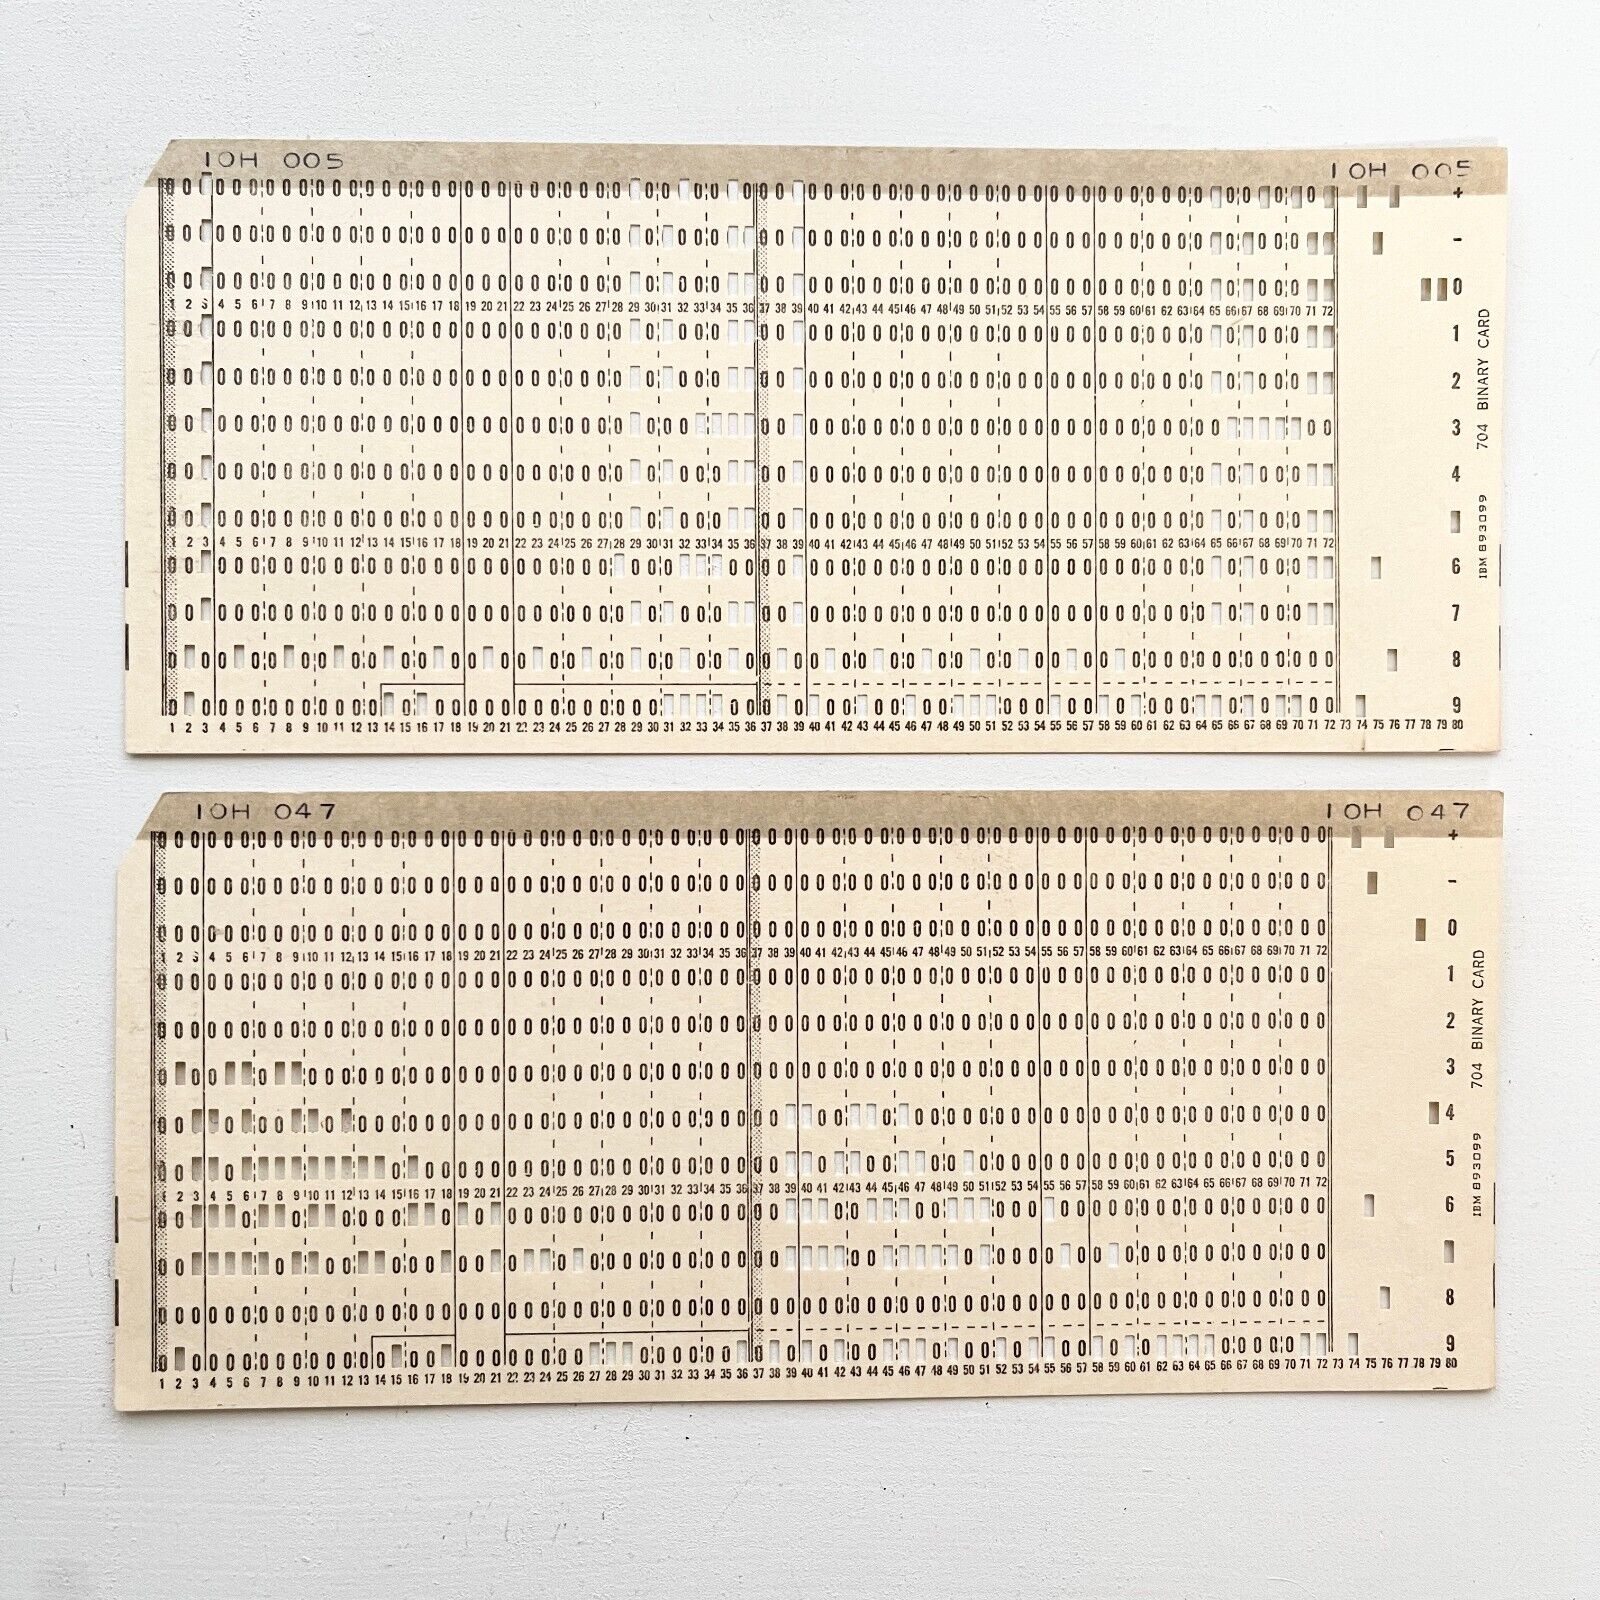 IBM 700 Series 704 Binary Data Punch Cards Mainframe Computer Processing 1950s